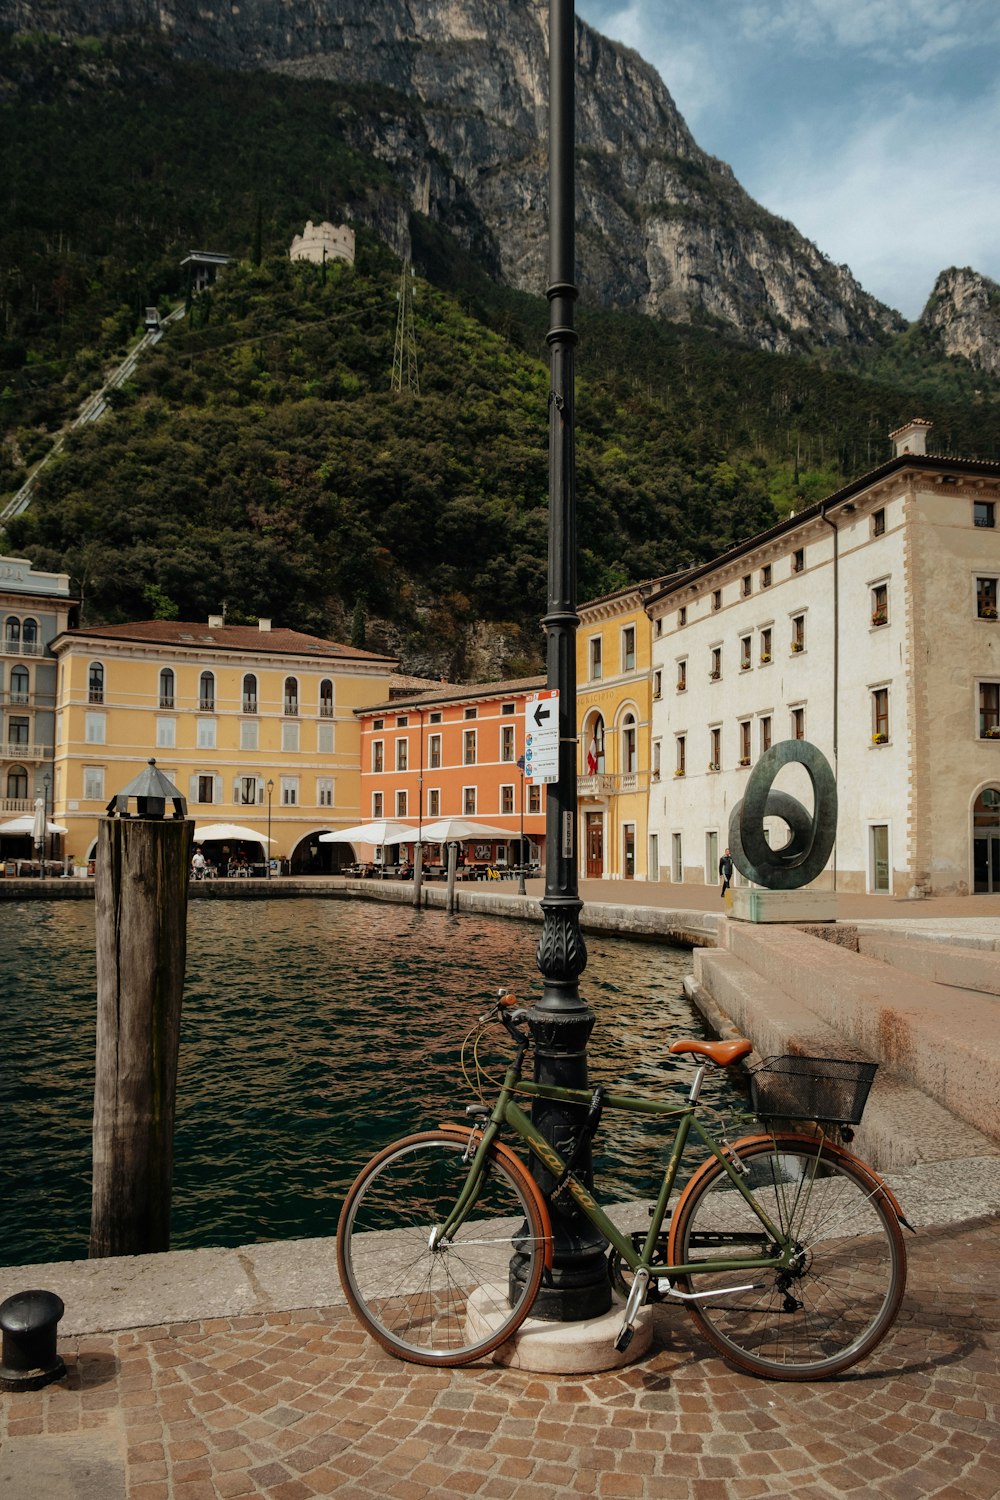 a bicycle parked next to a lamp post near a body of water